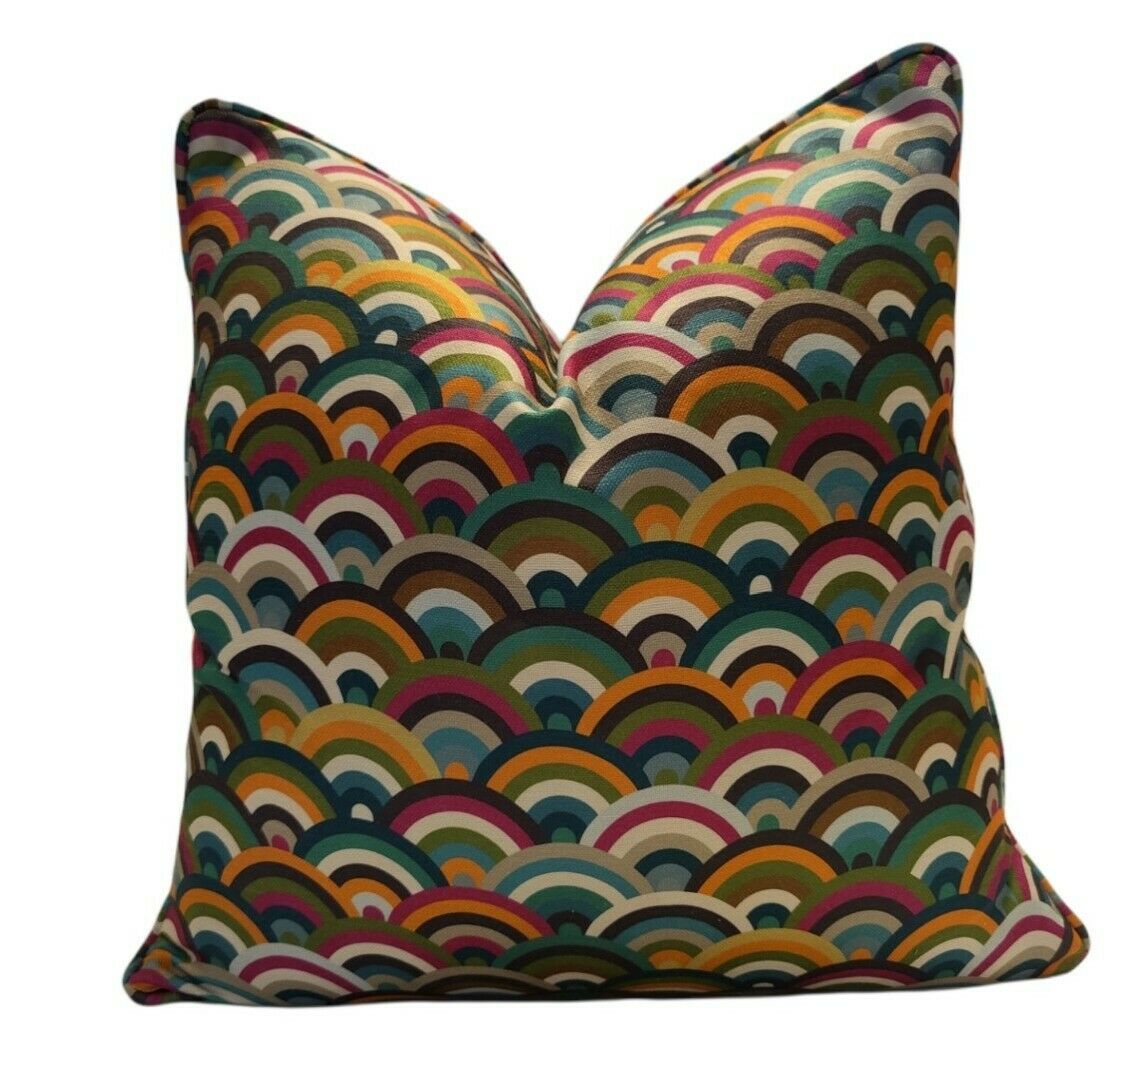 Art Of The Loom Fun Arch 20" / 50cm Piped Cushion Cover